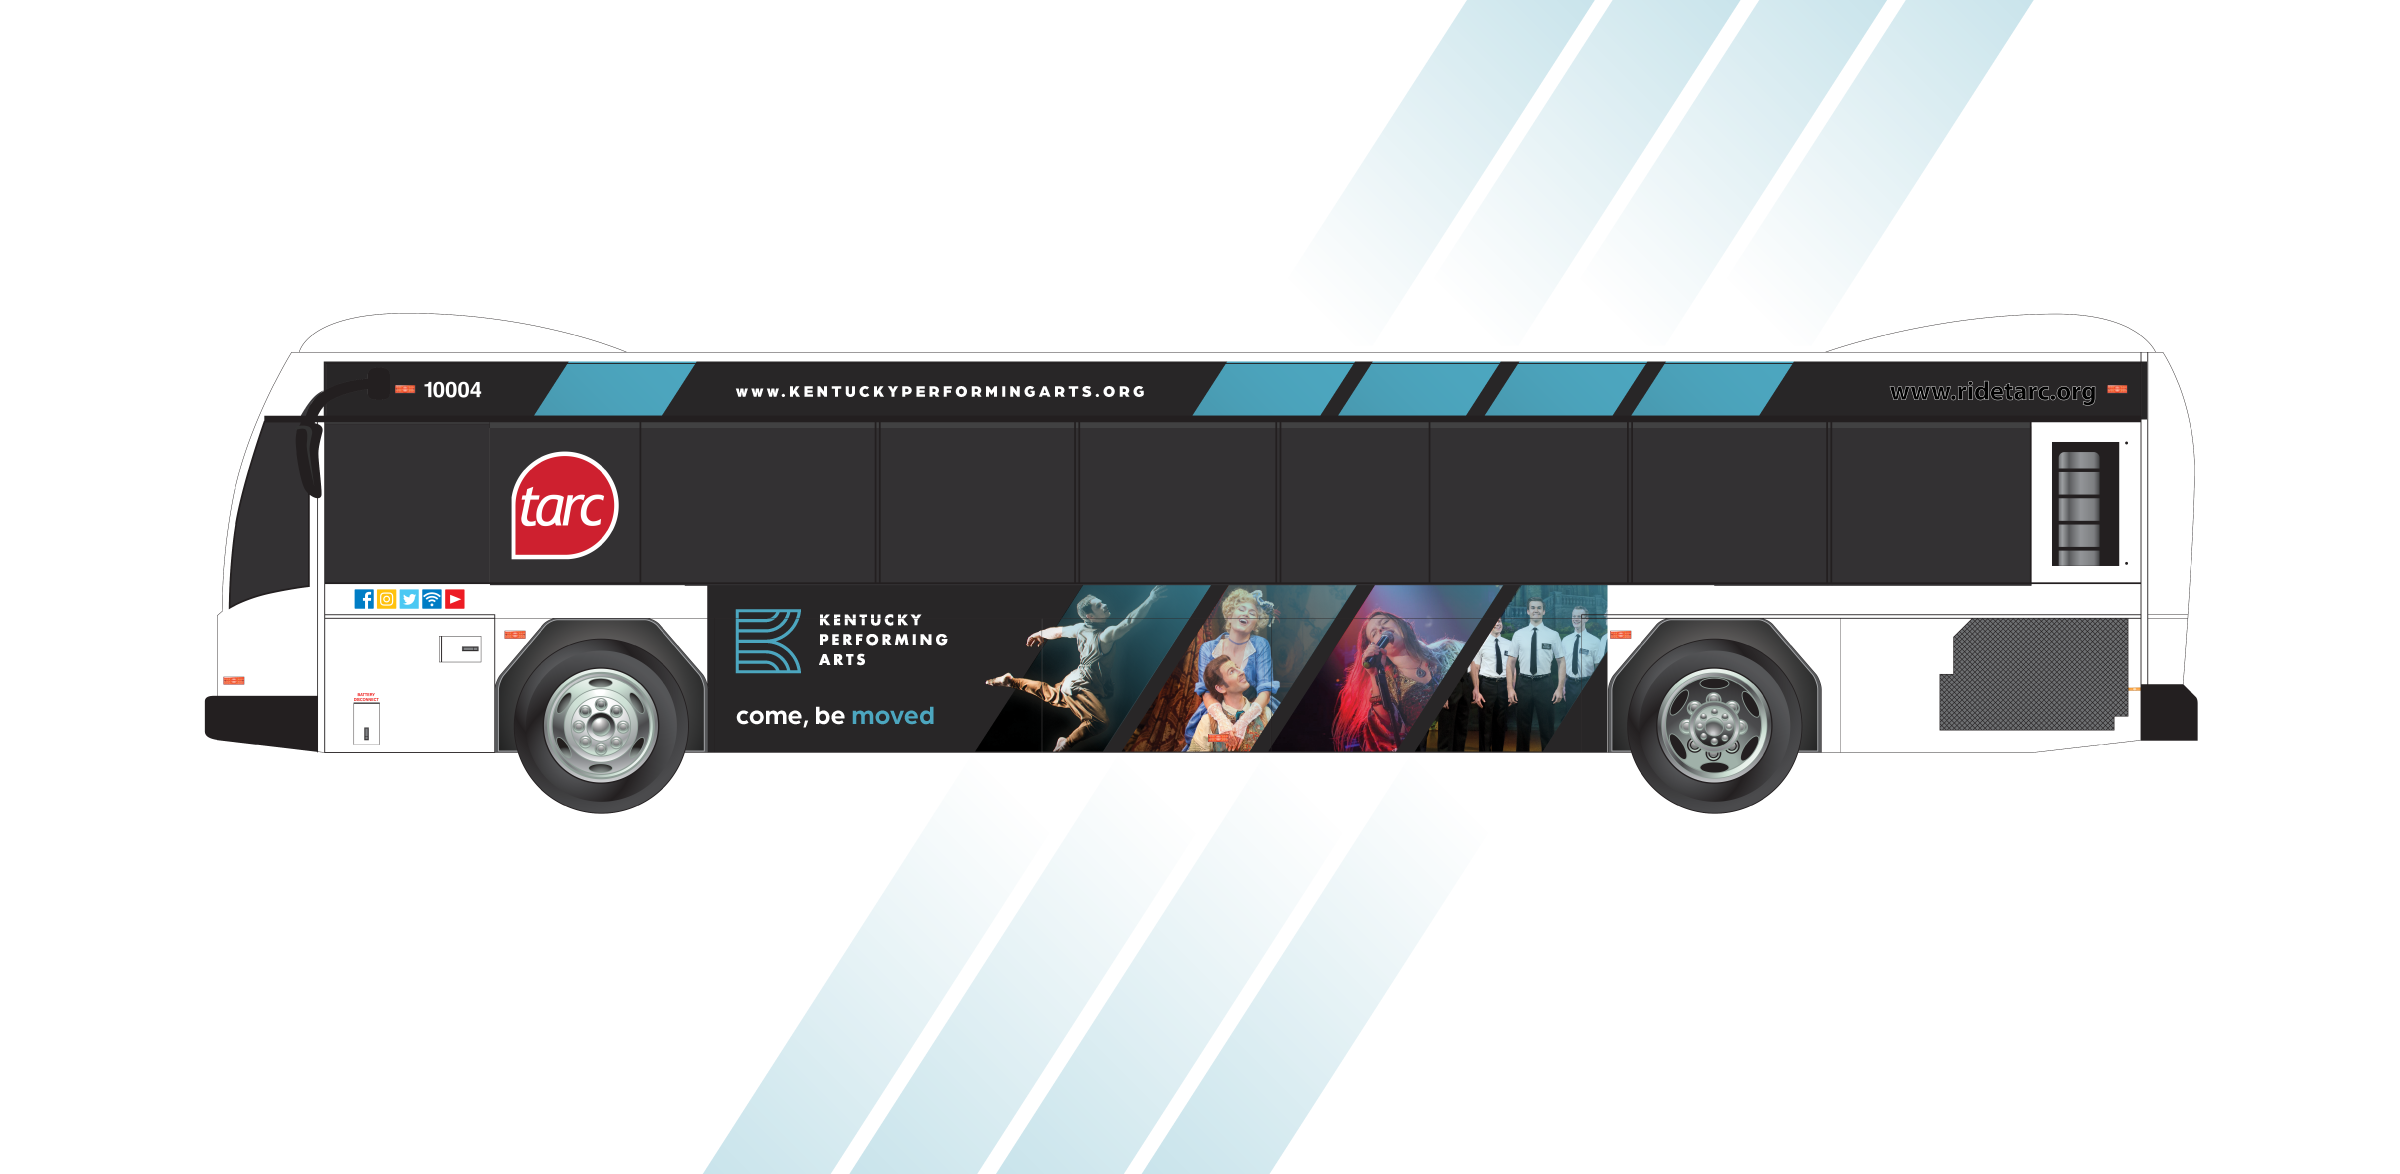 Bus advertisement for the Kentucky Performing Arts Center.